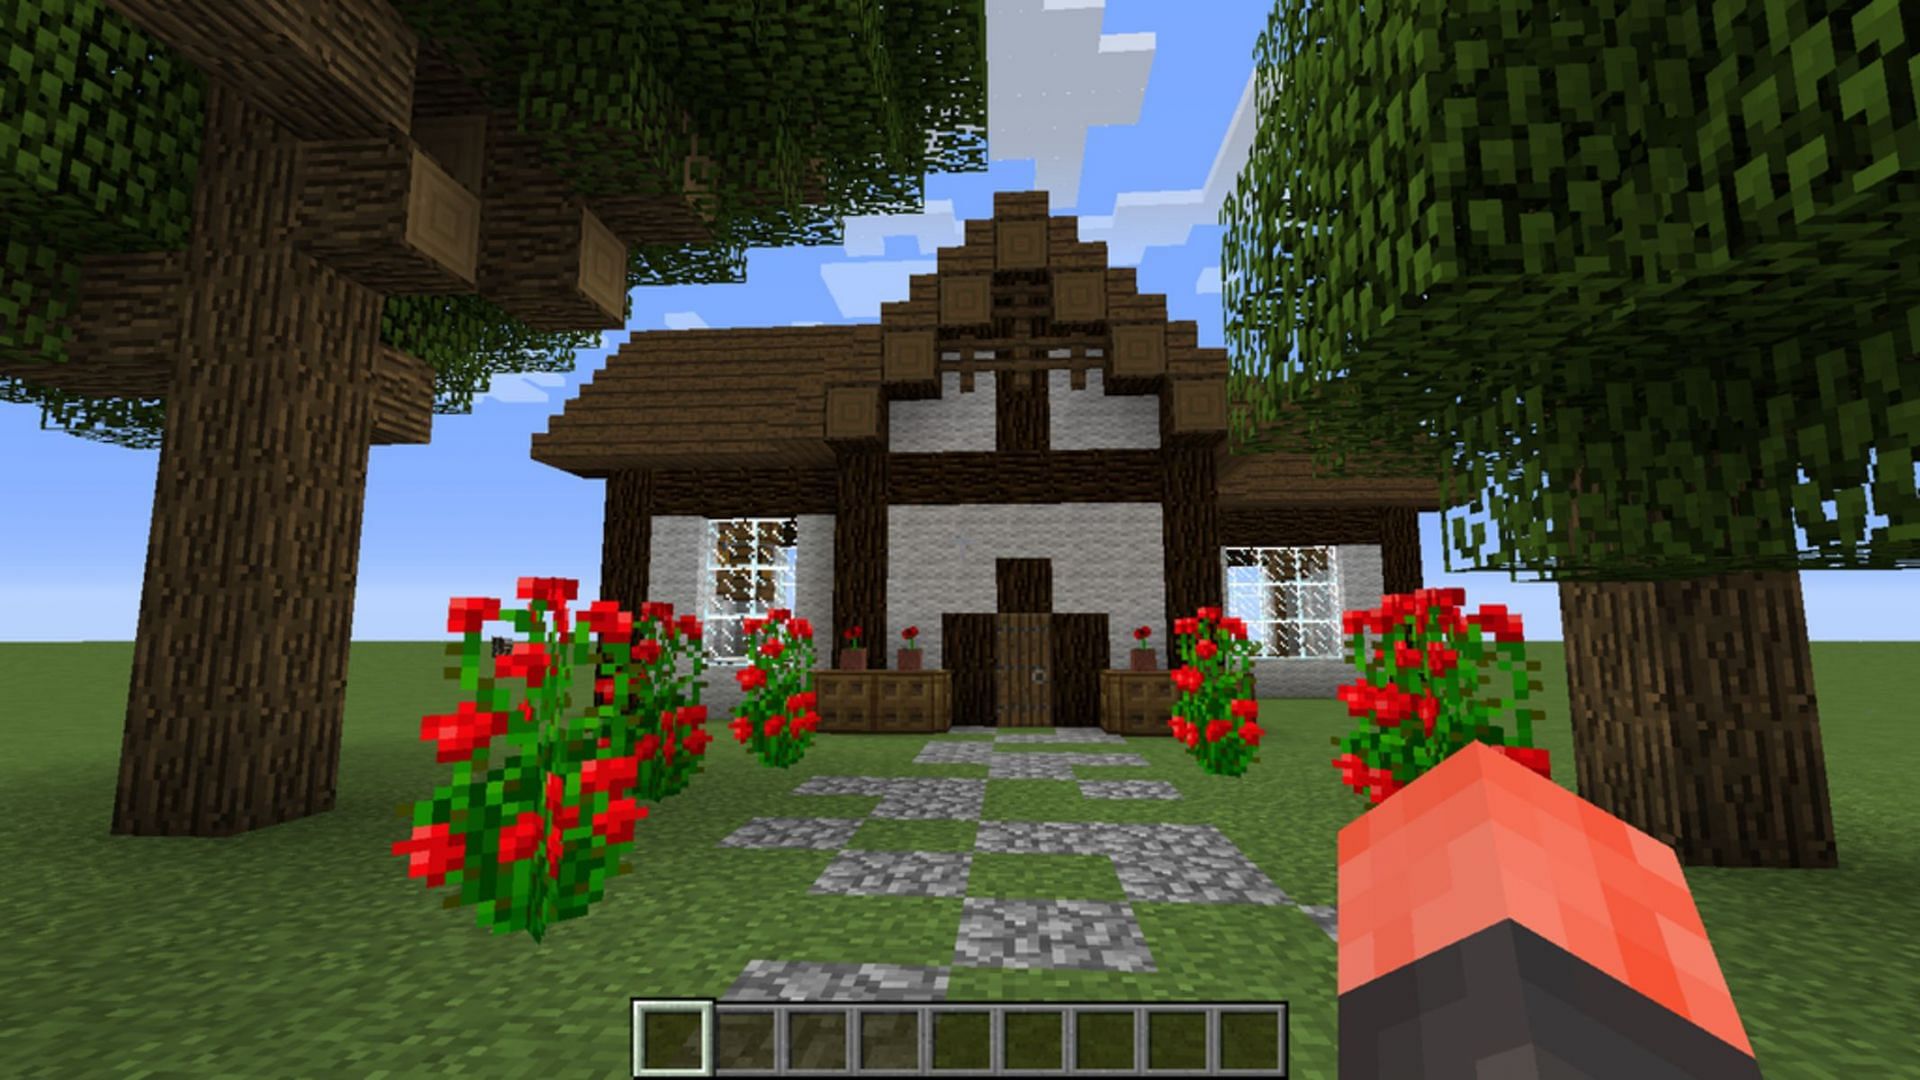 A simple cottage design complete with foliage (Image via Instructables user CFMinecrafter)